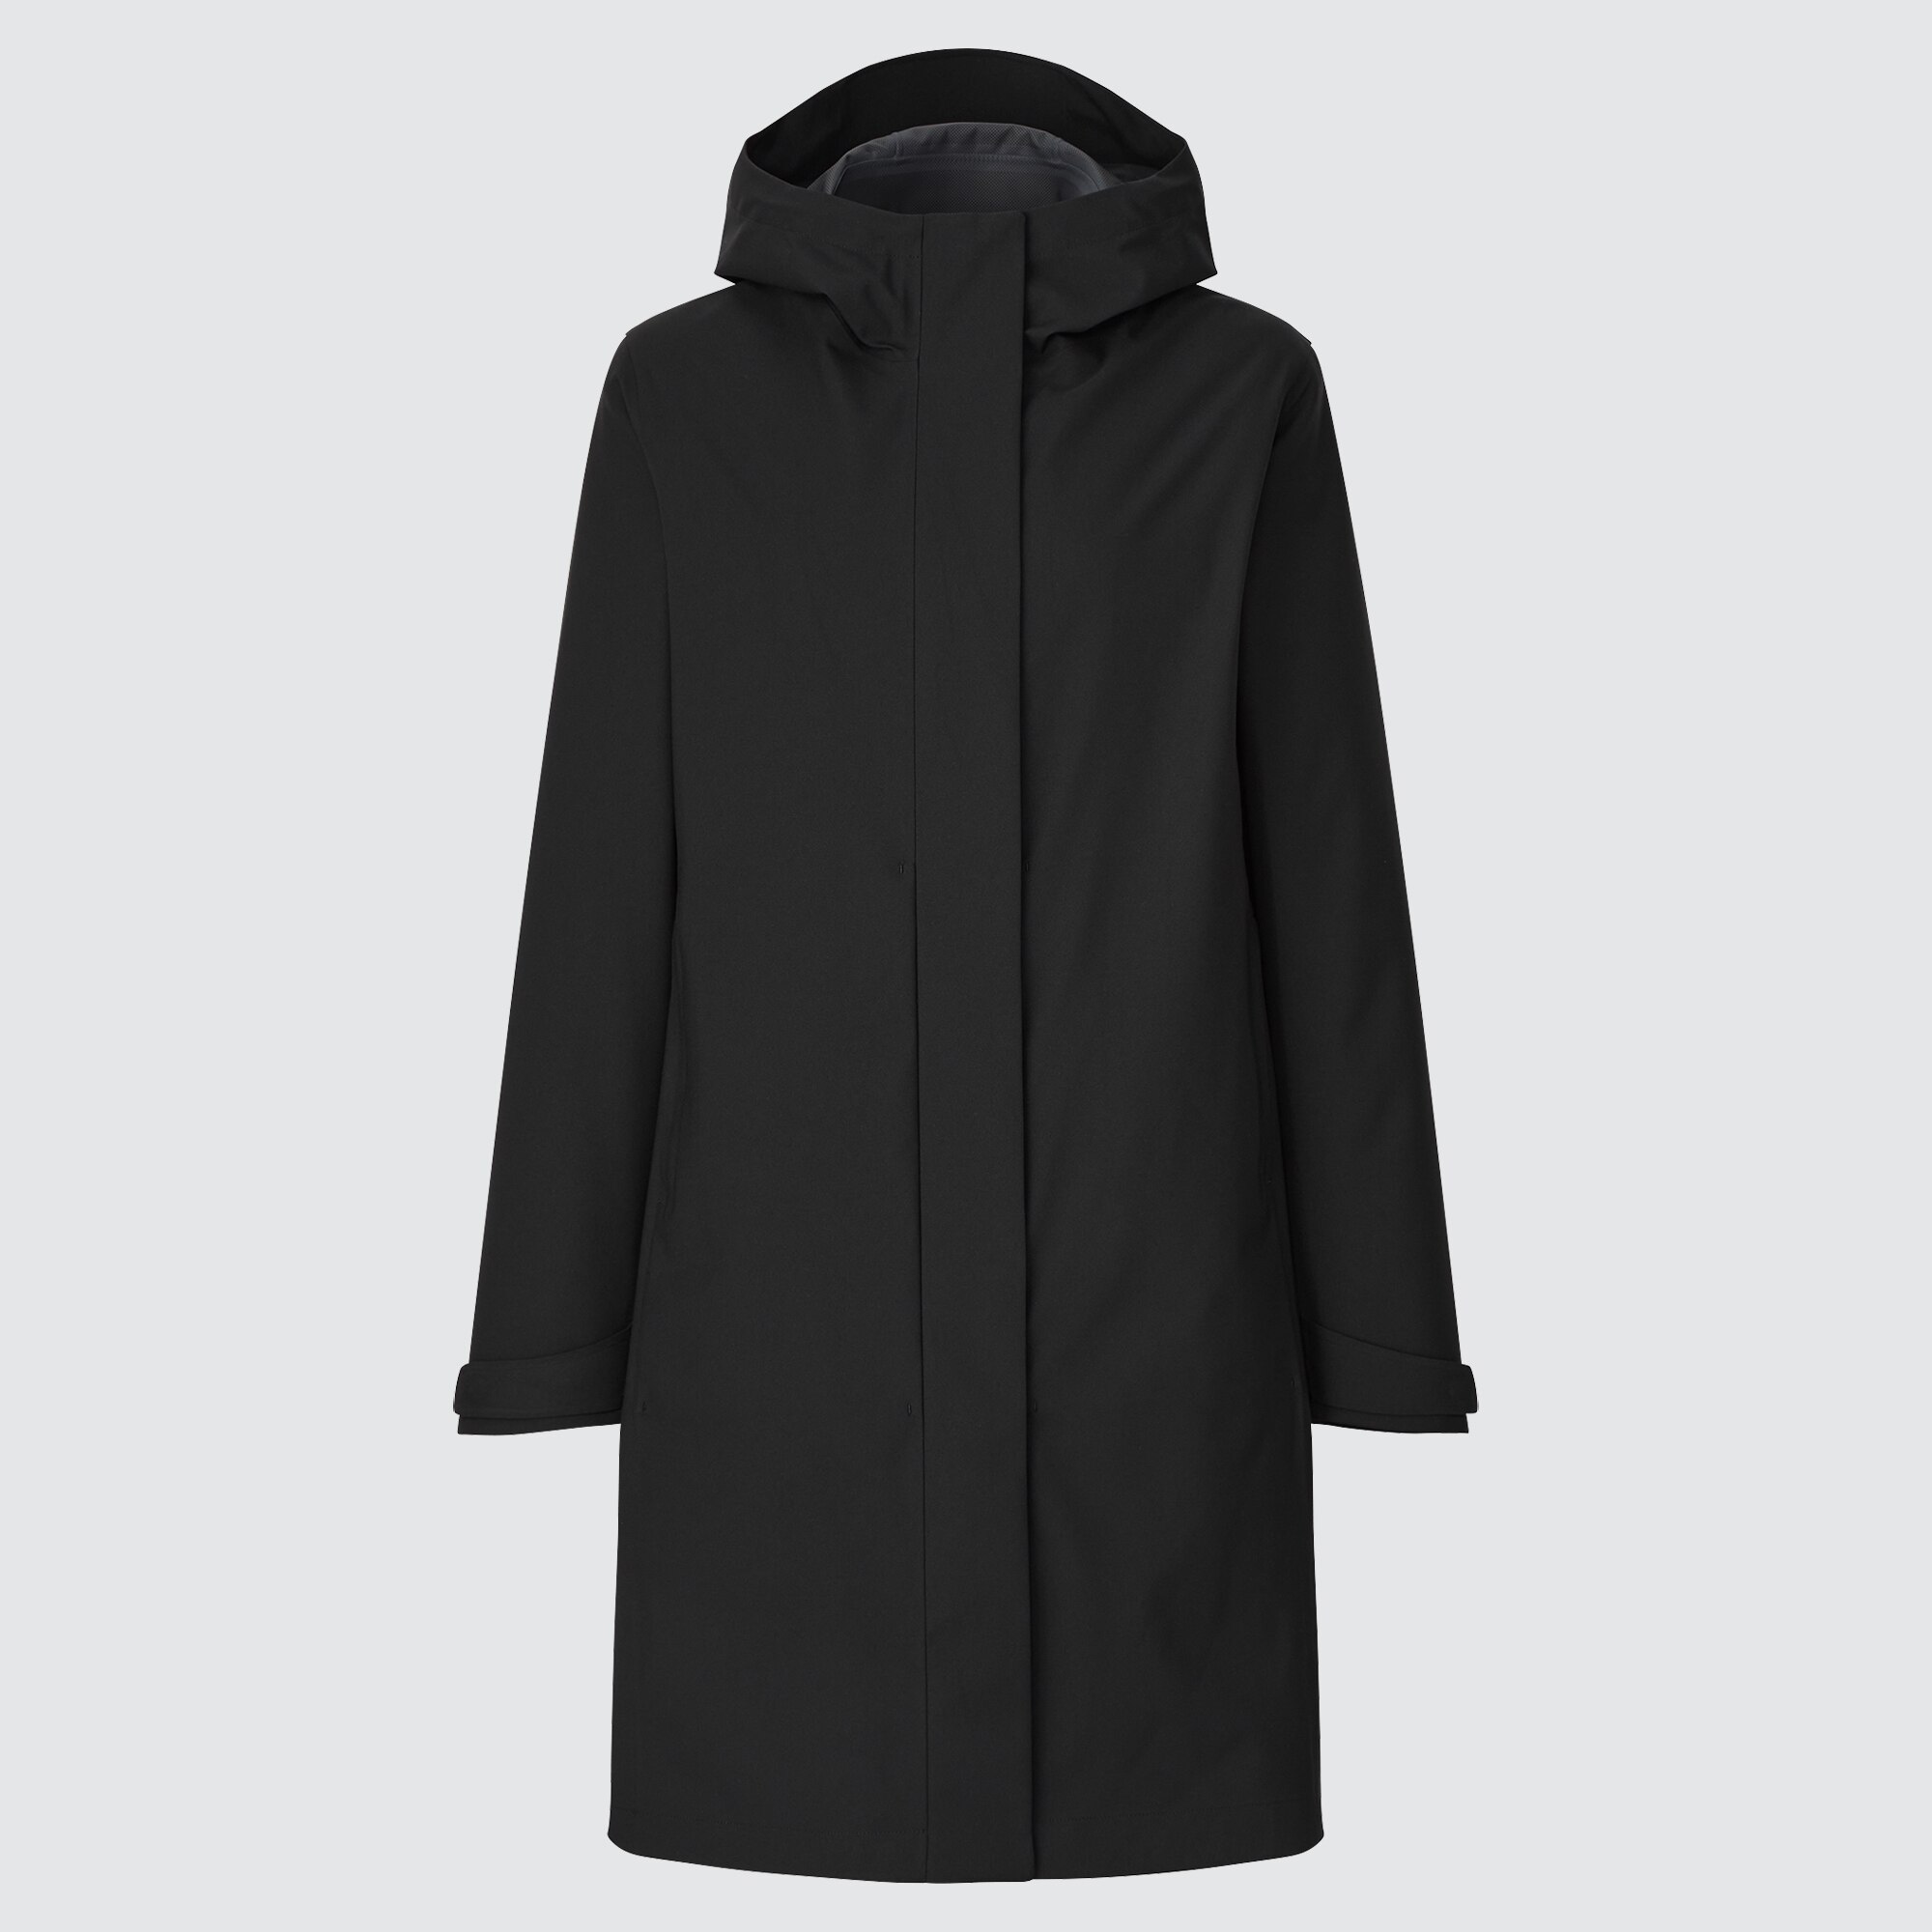 UNIQLO Mens Waterproof Jacket Mens Fashion Coats Jackets and Outerwear  on Carousell